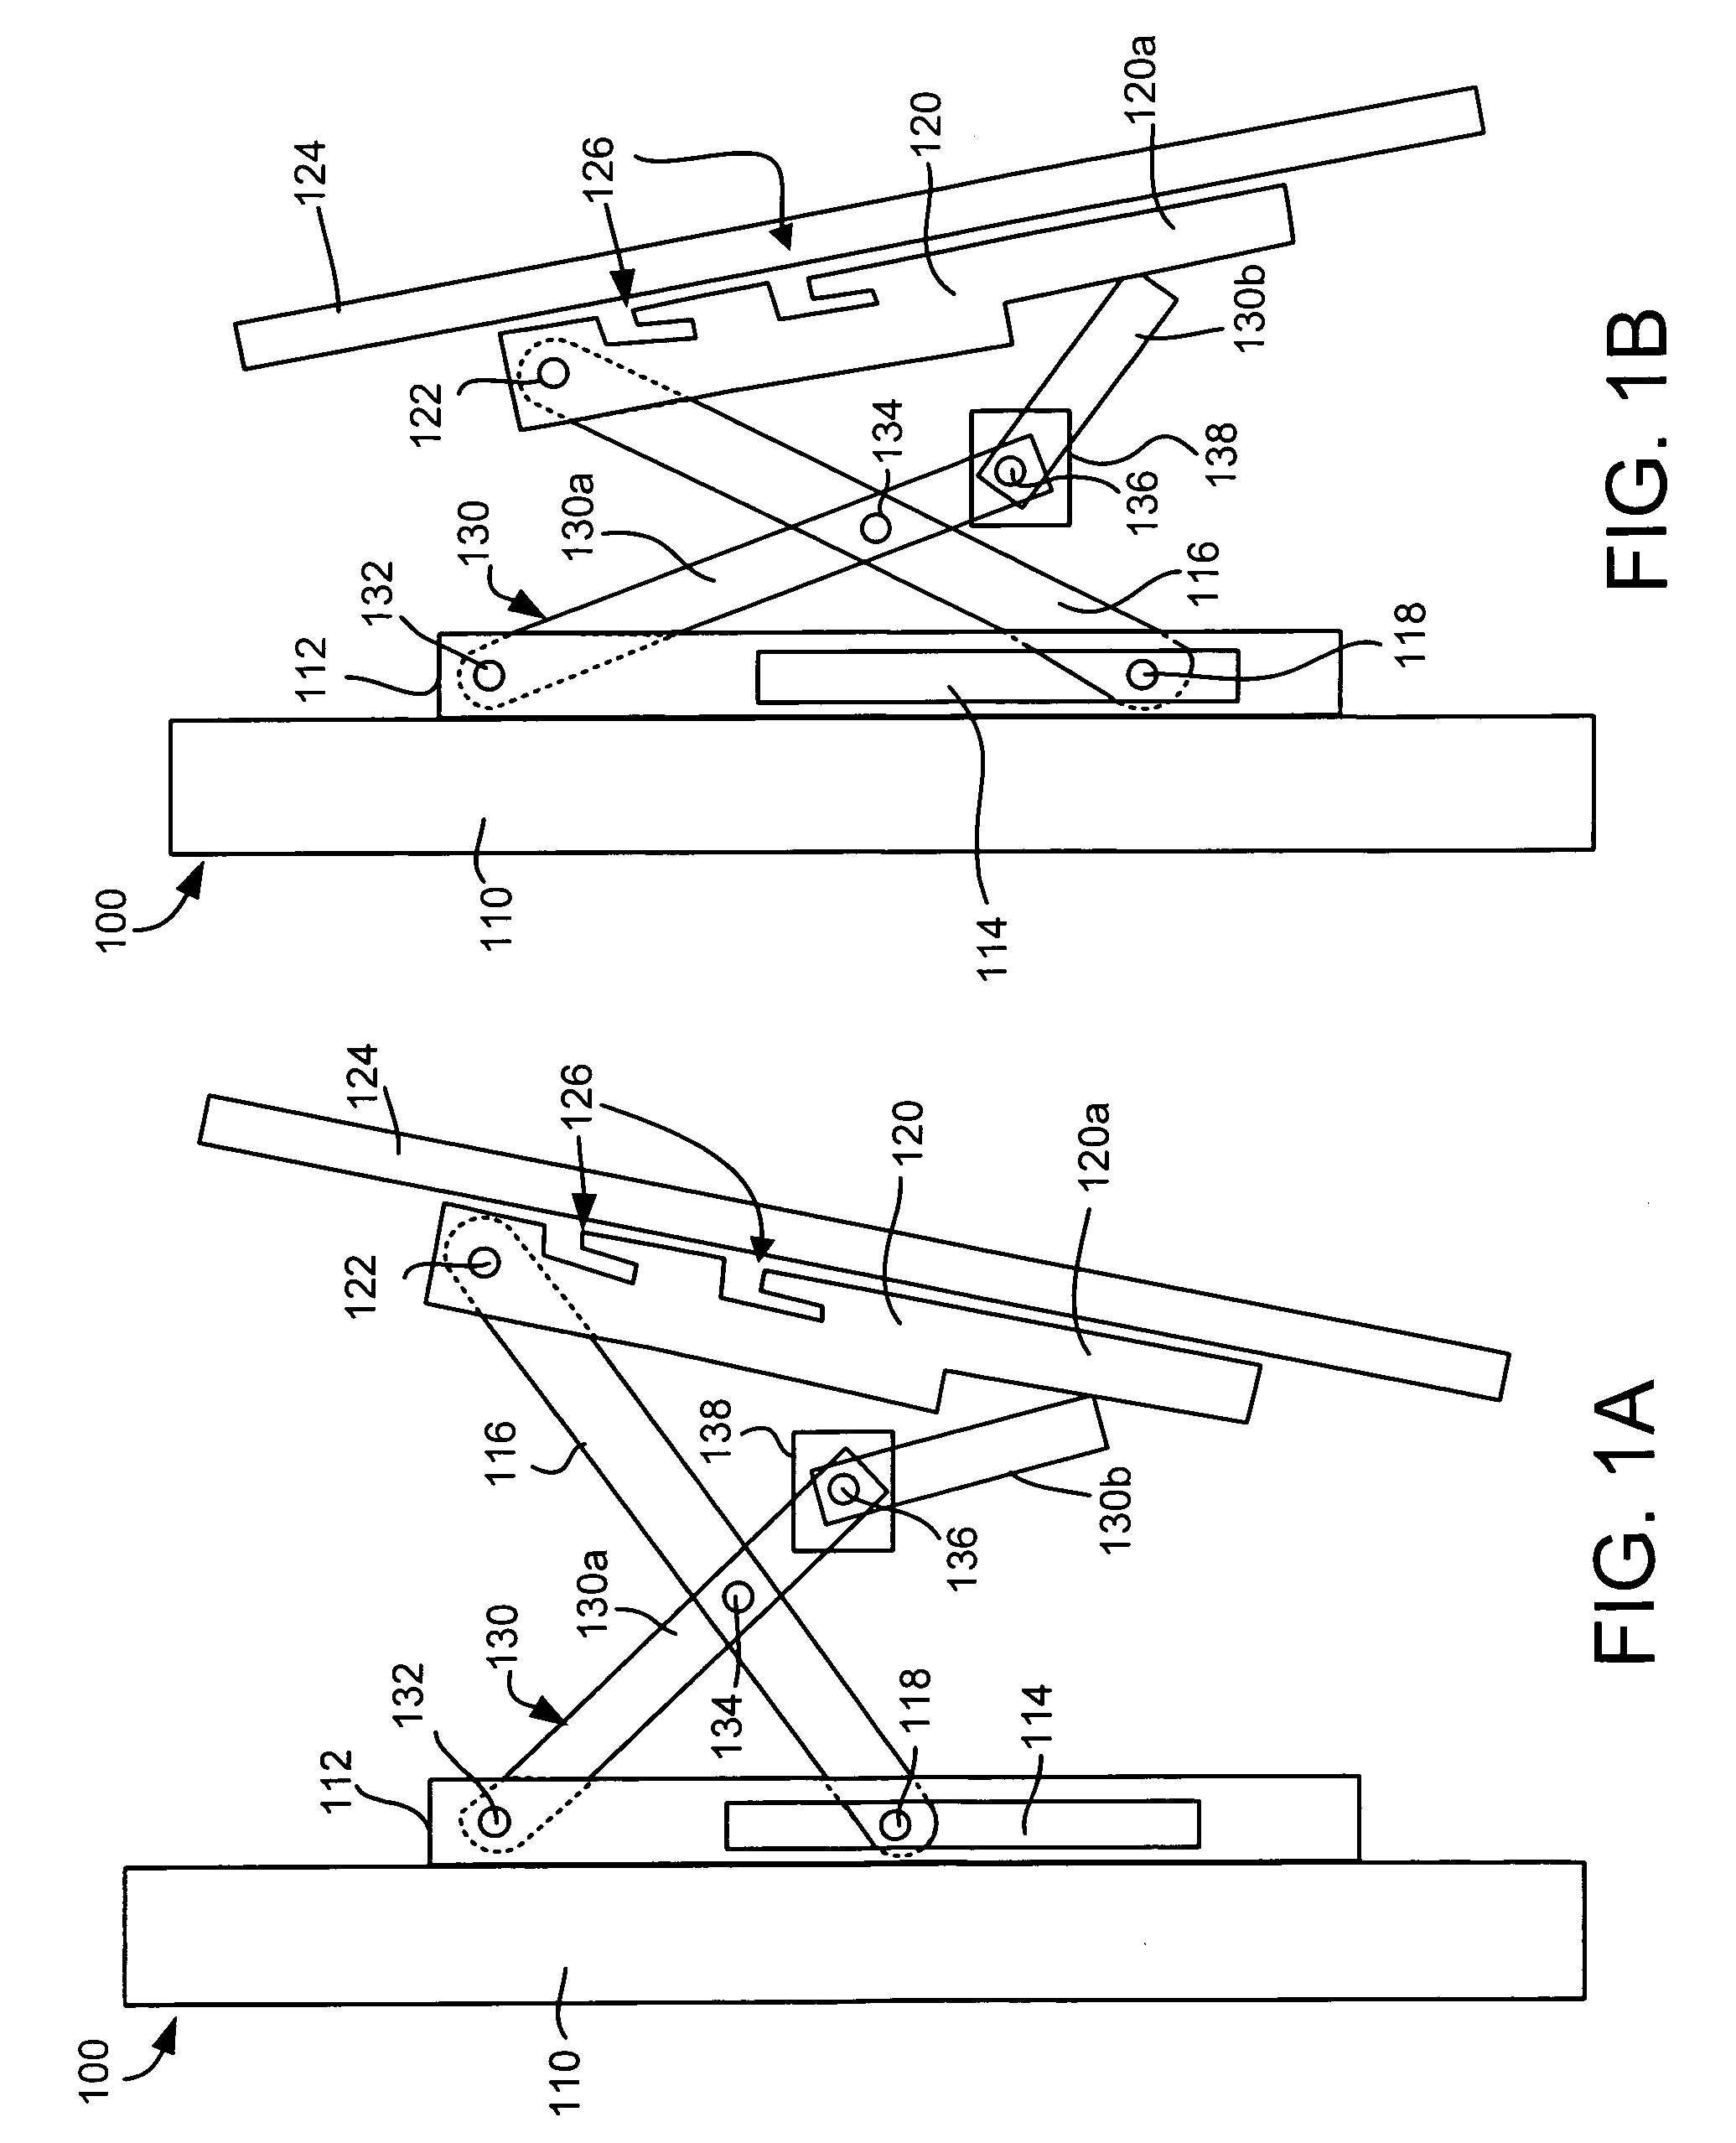 Adjustable display mount apparatus and system